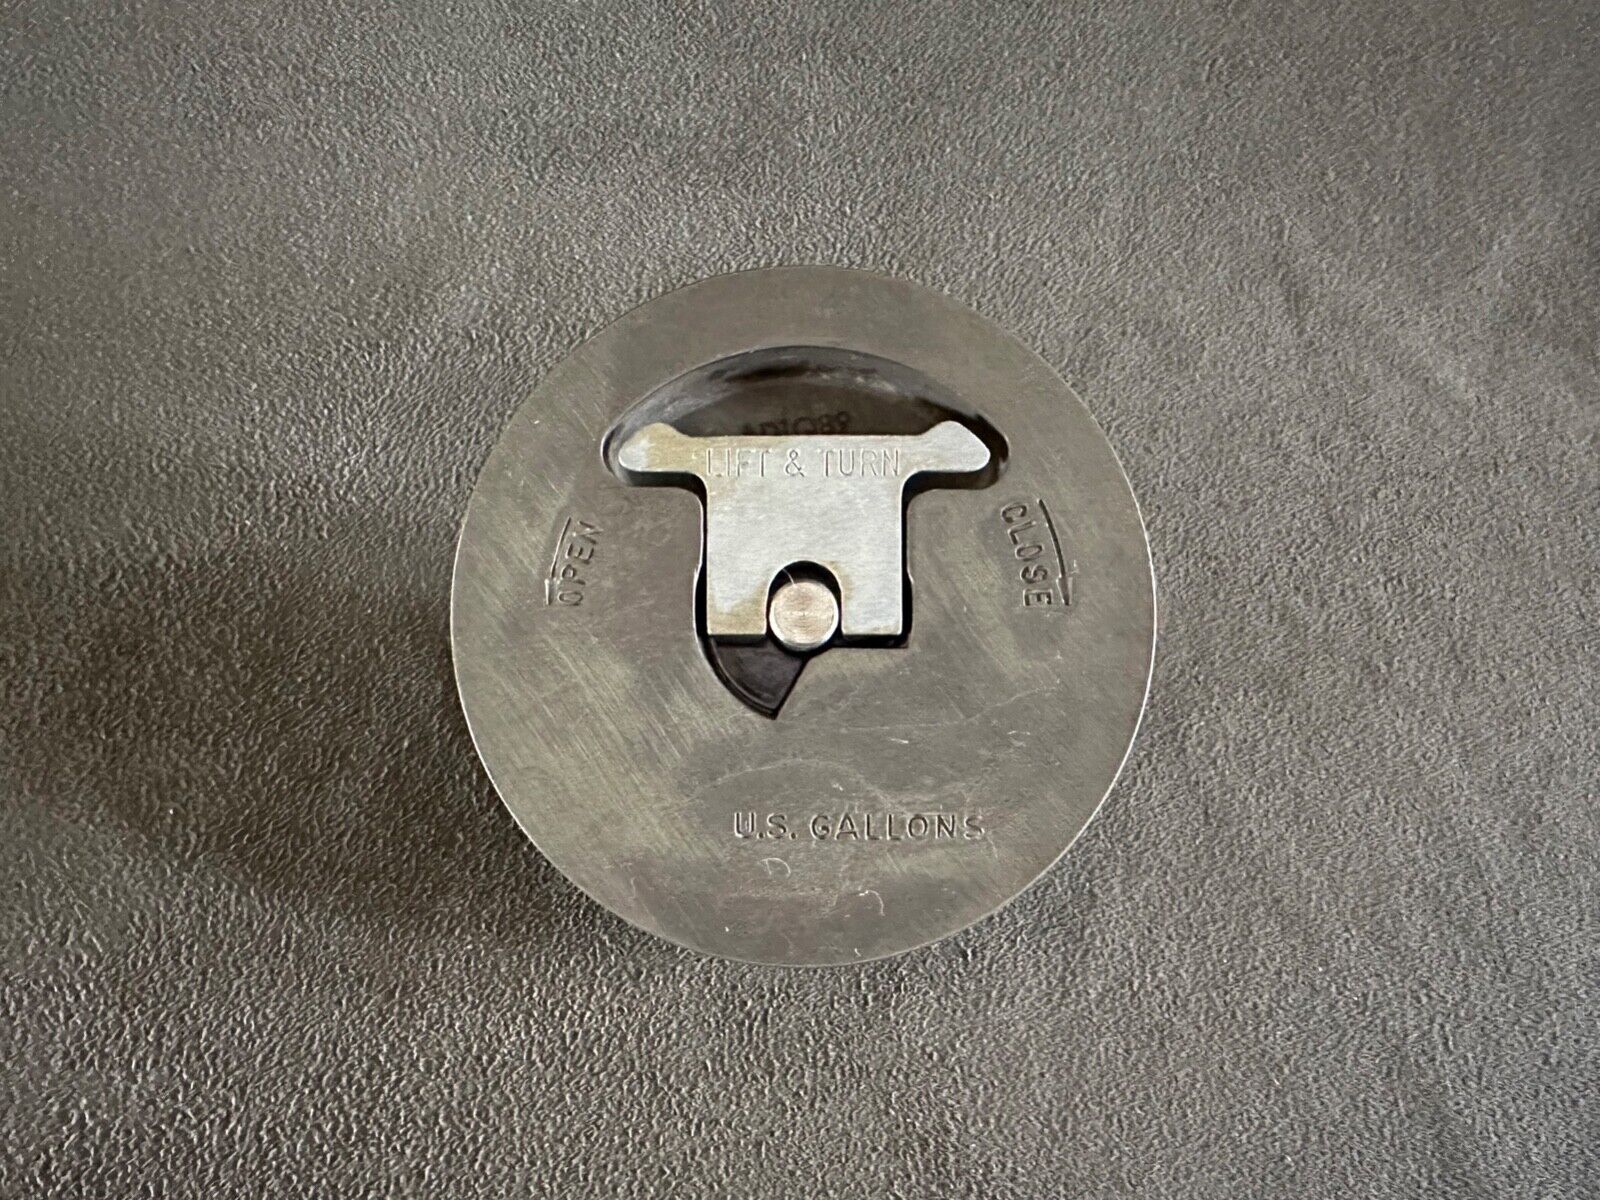 Shaw Aero Piper Aircraft Fuel Cap, P/N 531-001, New Surplus (Three Available)